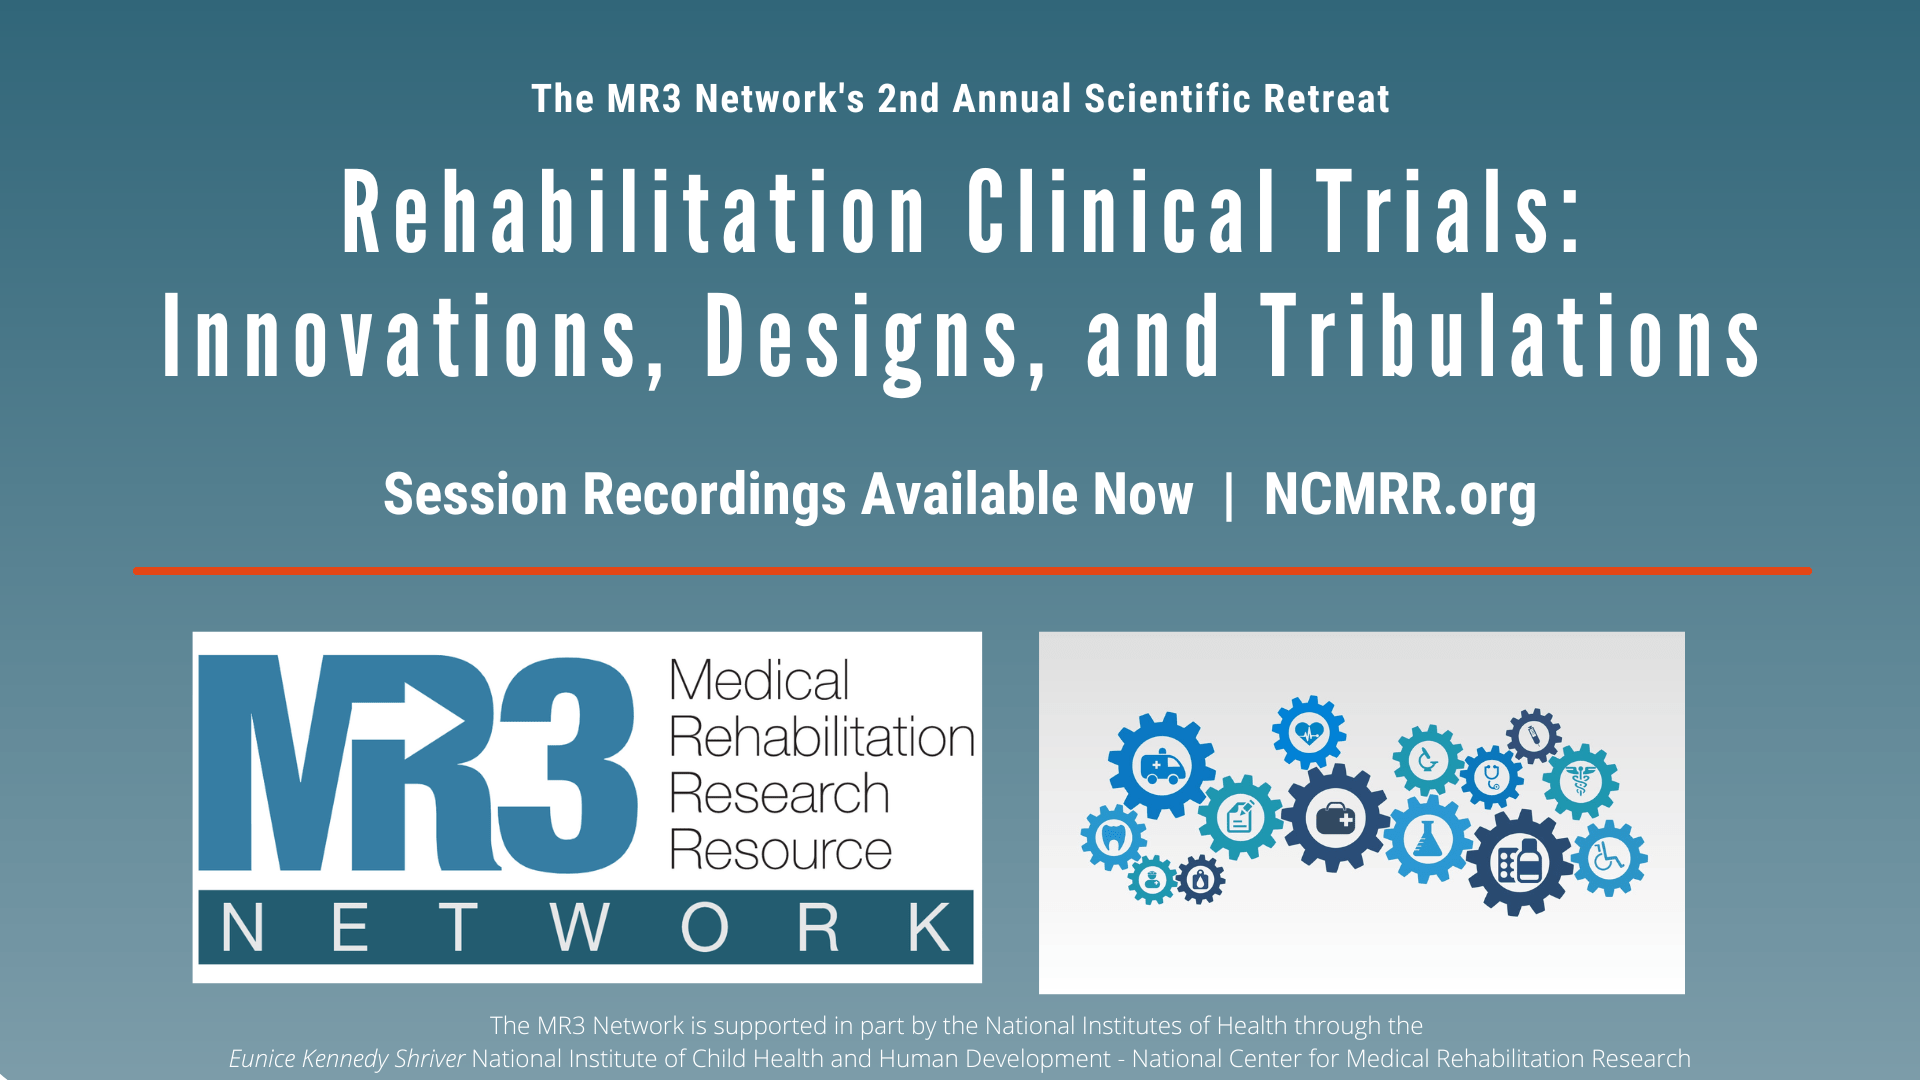 MR3 Network 2022 Scientific Retreat "Rehabilitation Clinical Trials: Innovations, Designs, and Tribulations" video archive